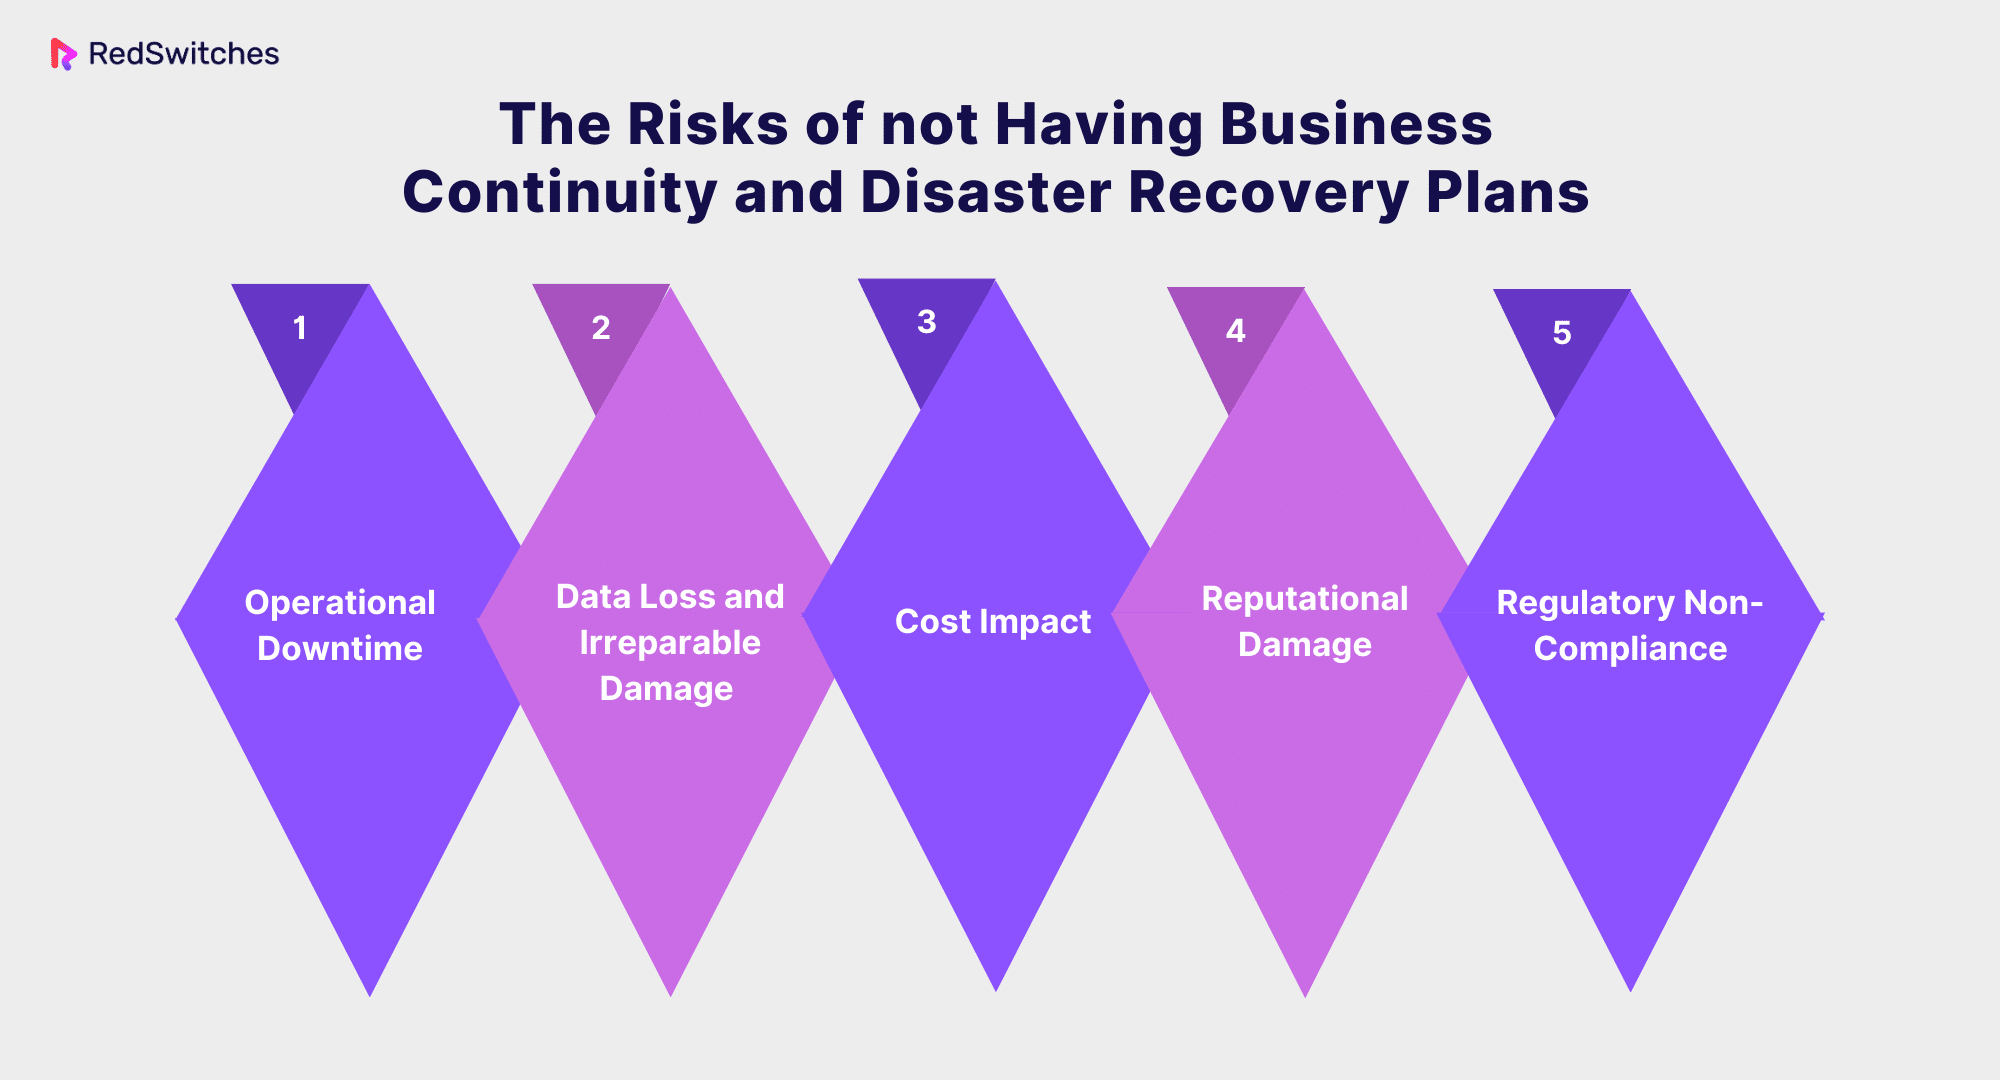 Risks of Not Having Business Continuity and Disaster Recovery Plans